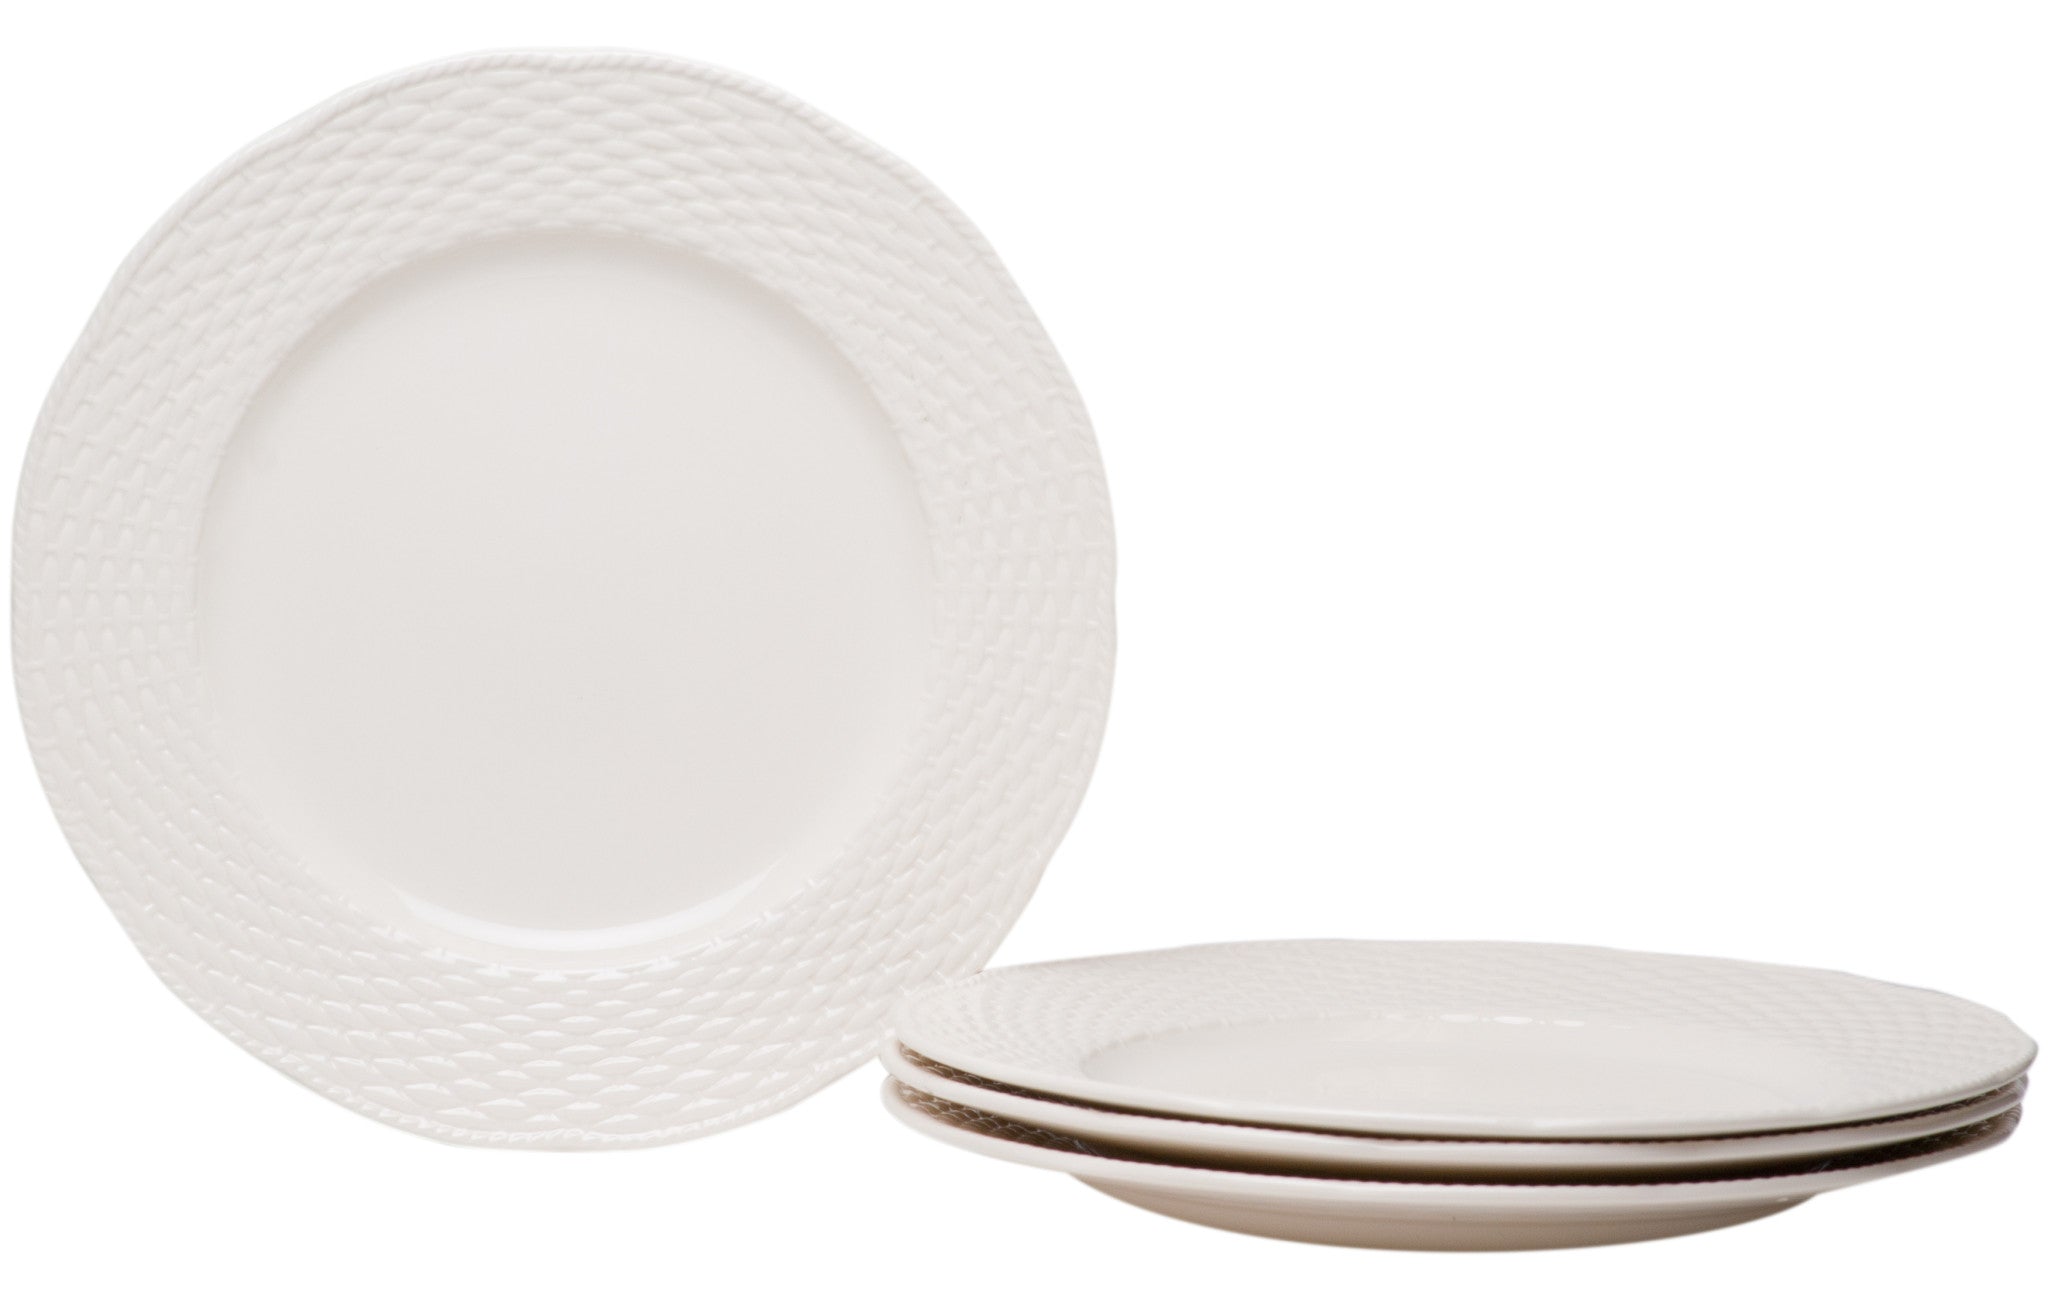 White Four Piece Weave Stoneware Service For Four Dinner Plate Set